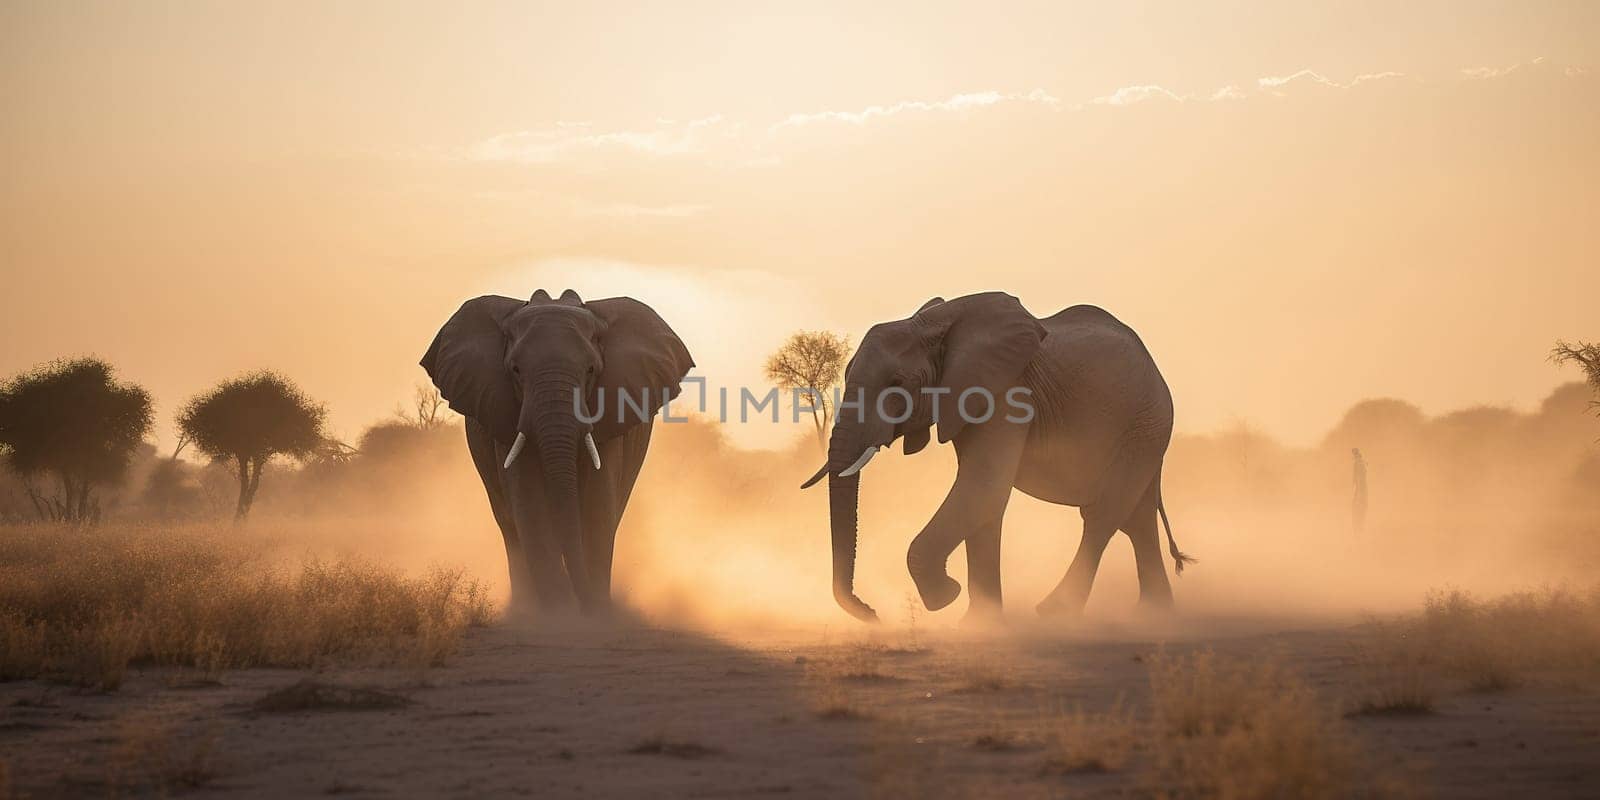 Pair of elephants wandering through the steppe by tan4ikk1